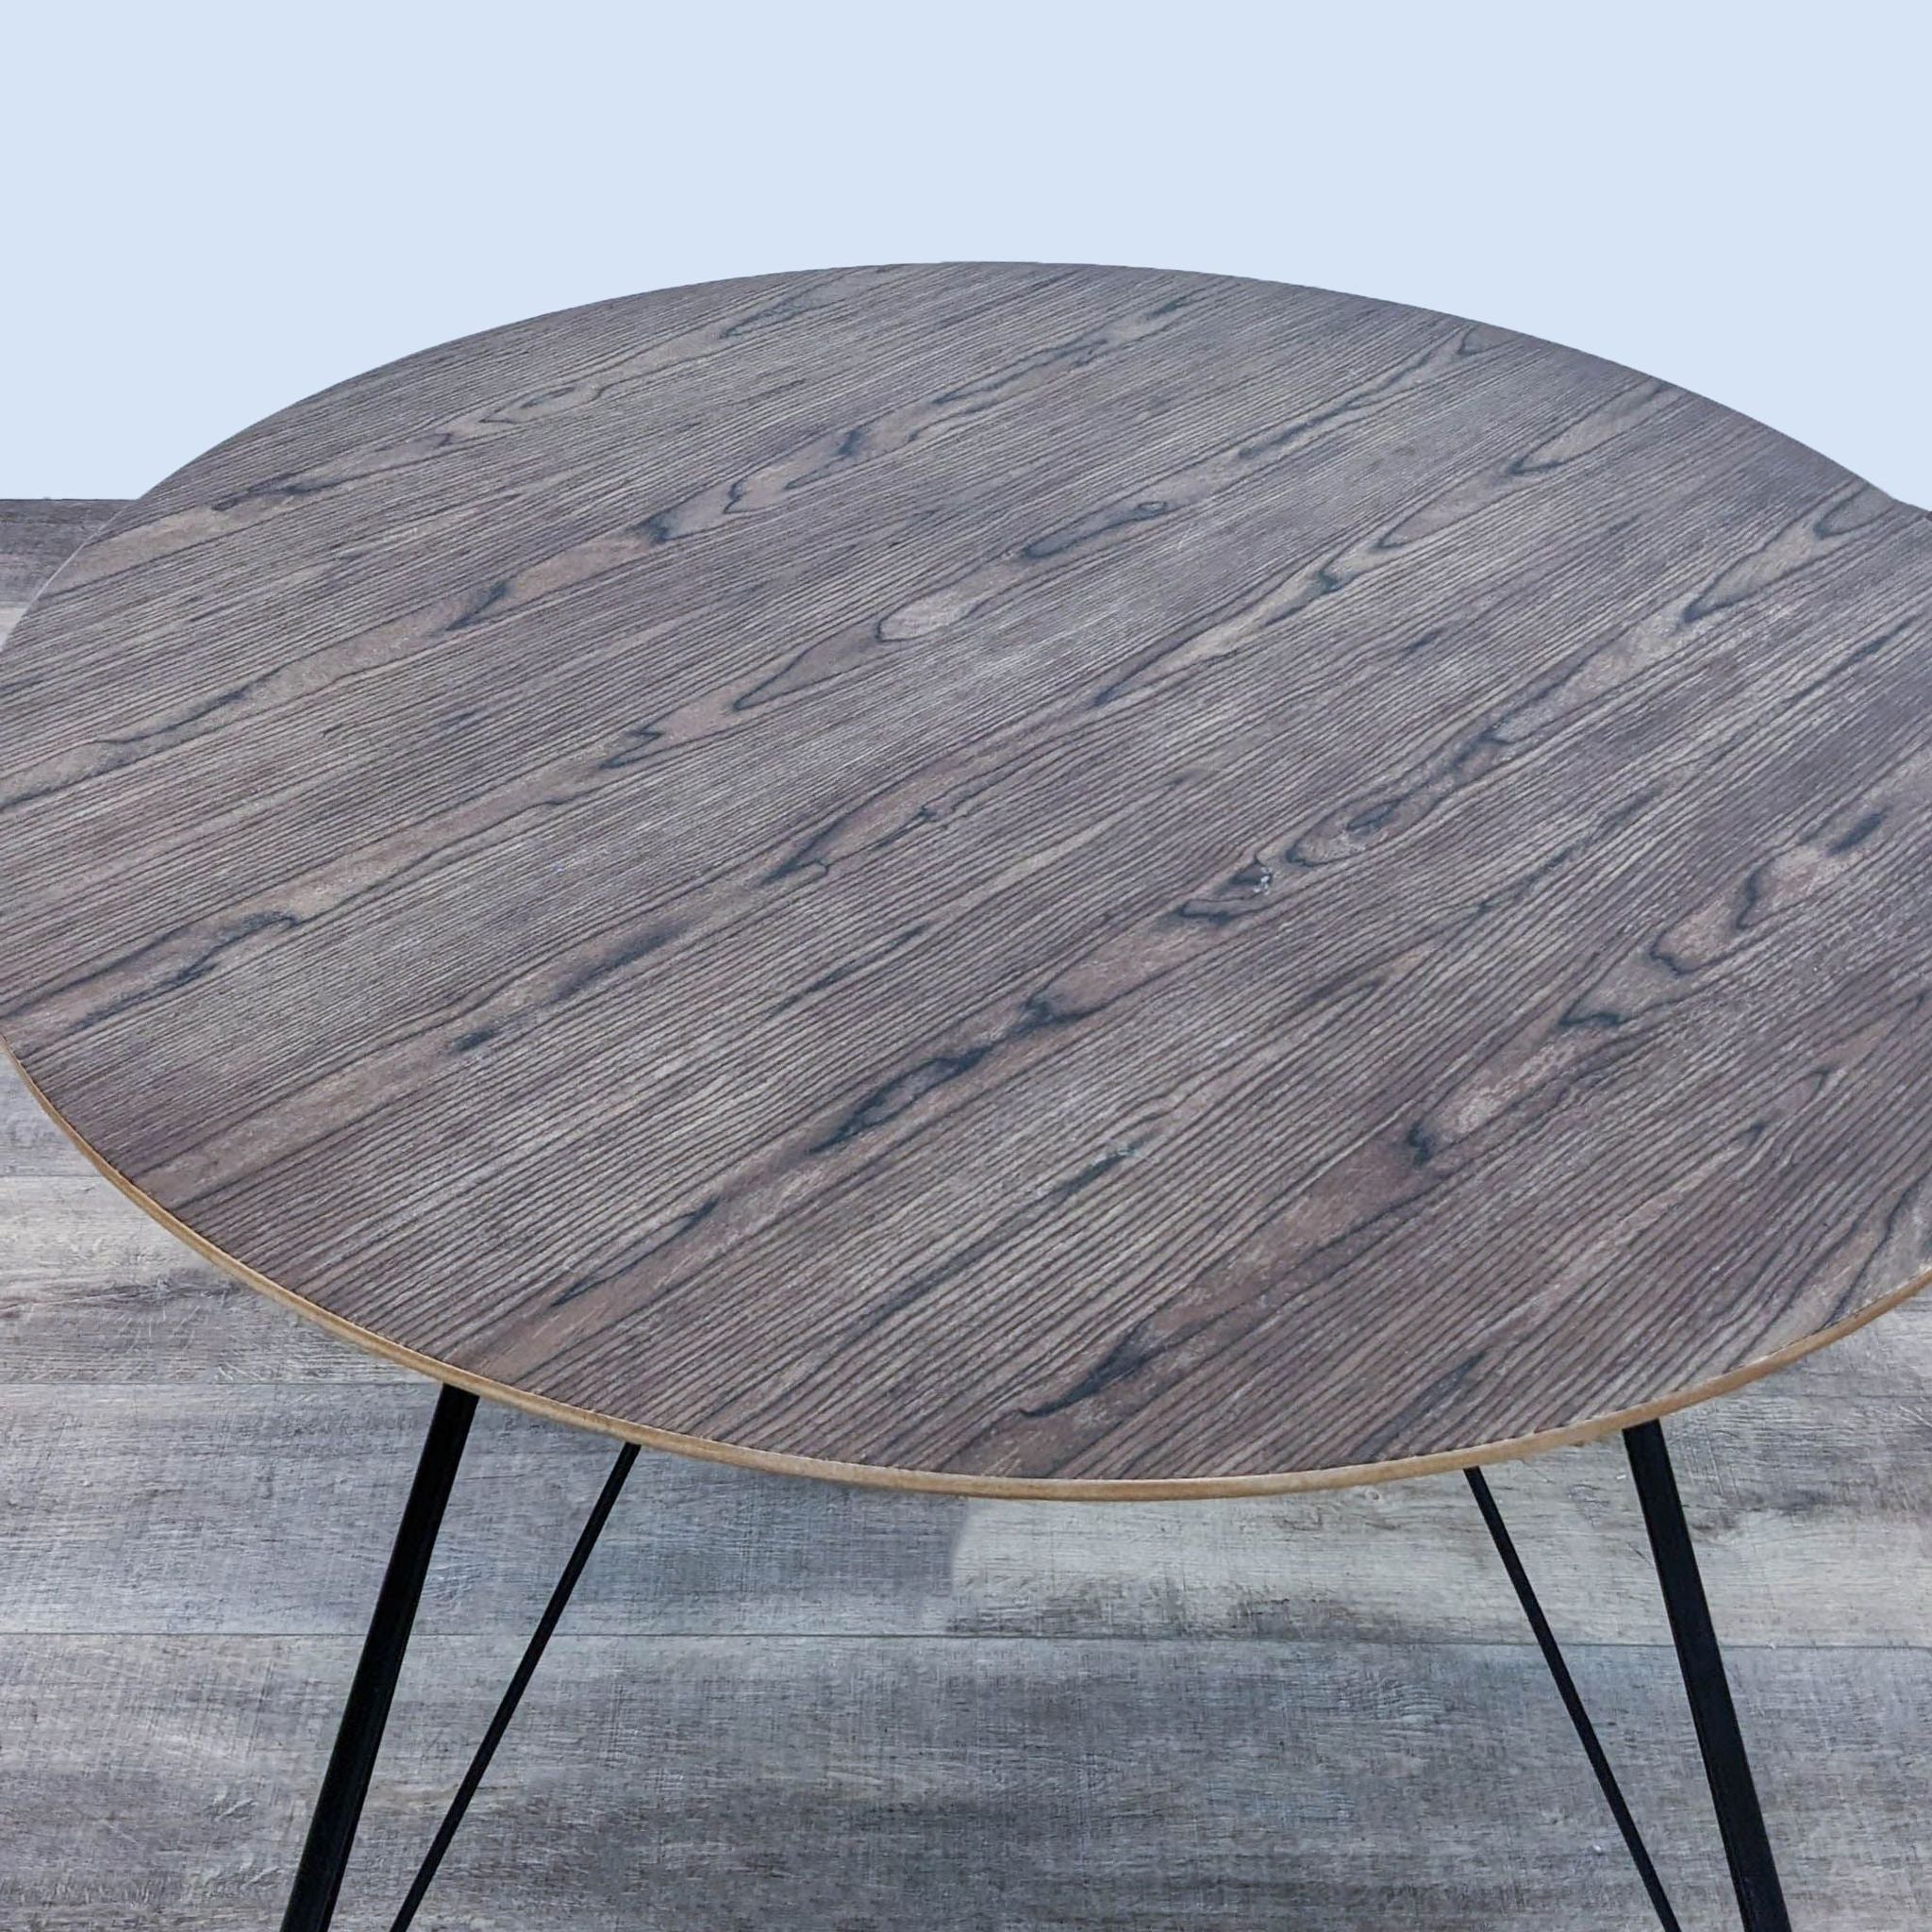 2. Modway Satellite dining table featuring a circular wood grain top and sleek black hairpin legs, shown from a top-angle view.